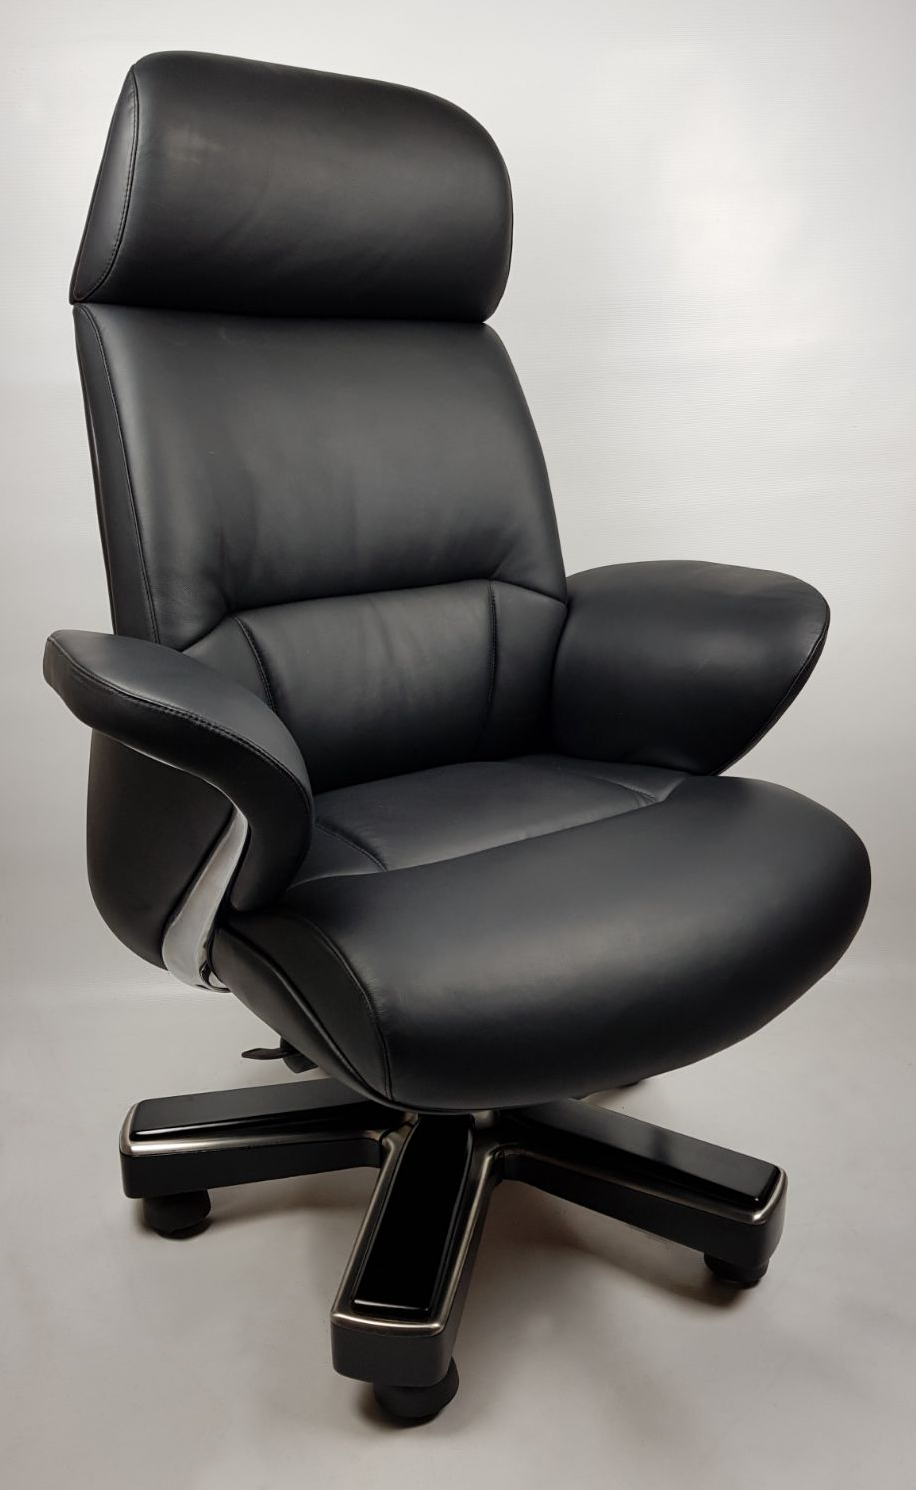 Large Luxury Executive Office Chair with Genuine Black Leather - YS1605A Near Me